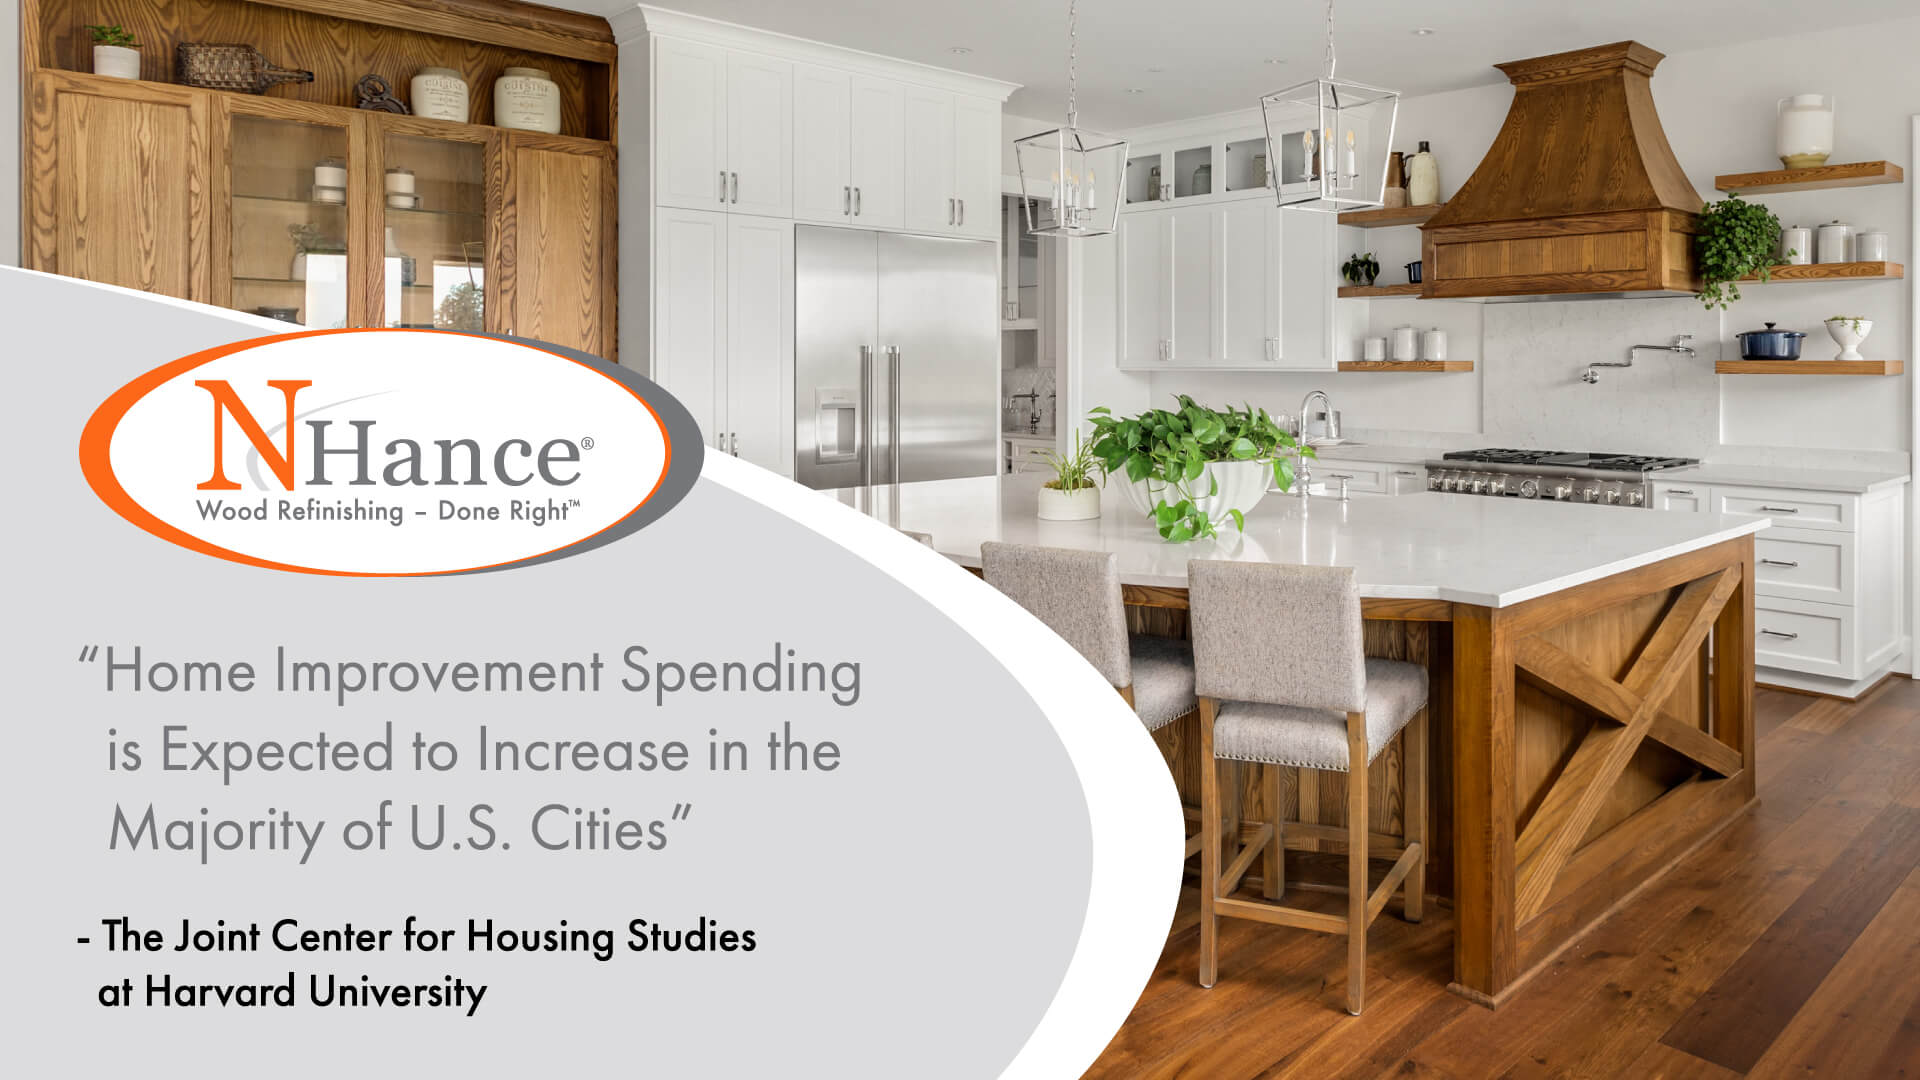 N-Hance Franchise about home improvement spending increase in the majority of U.S. Cities